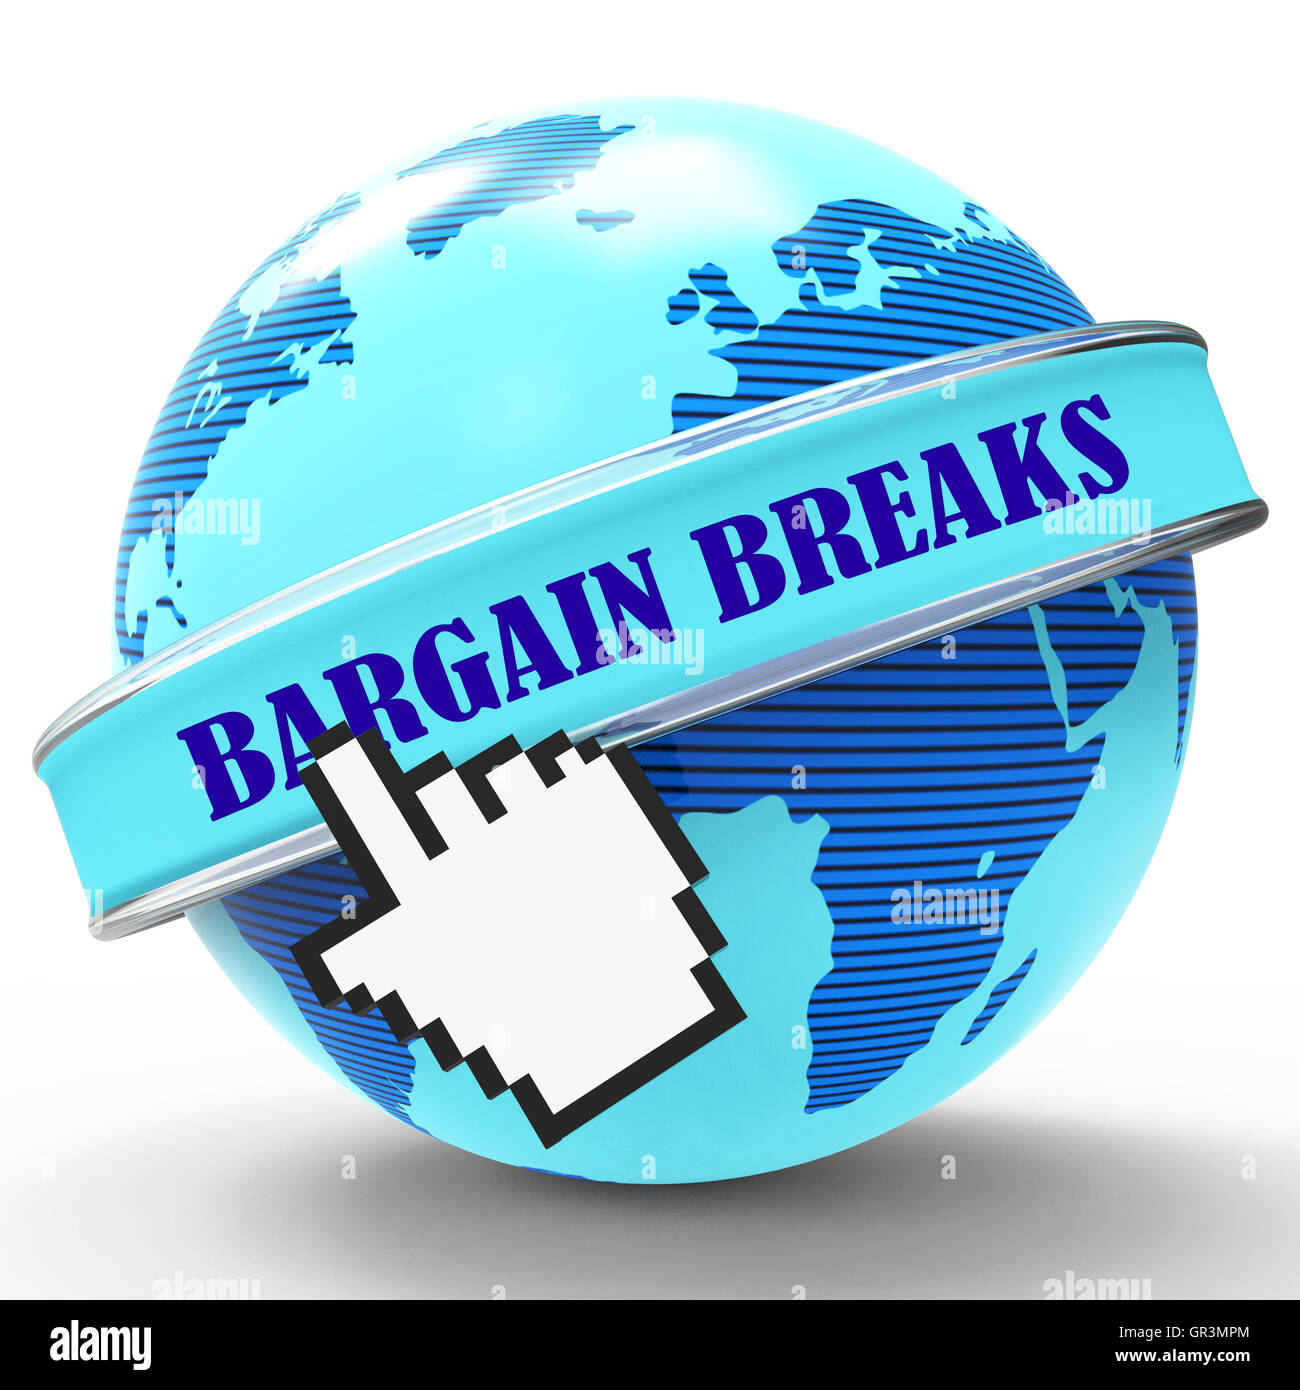 Bargain Breaks Showing Short Holiday And Getaway Stock Photo